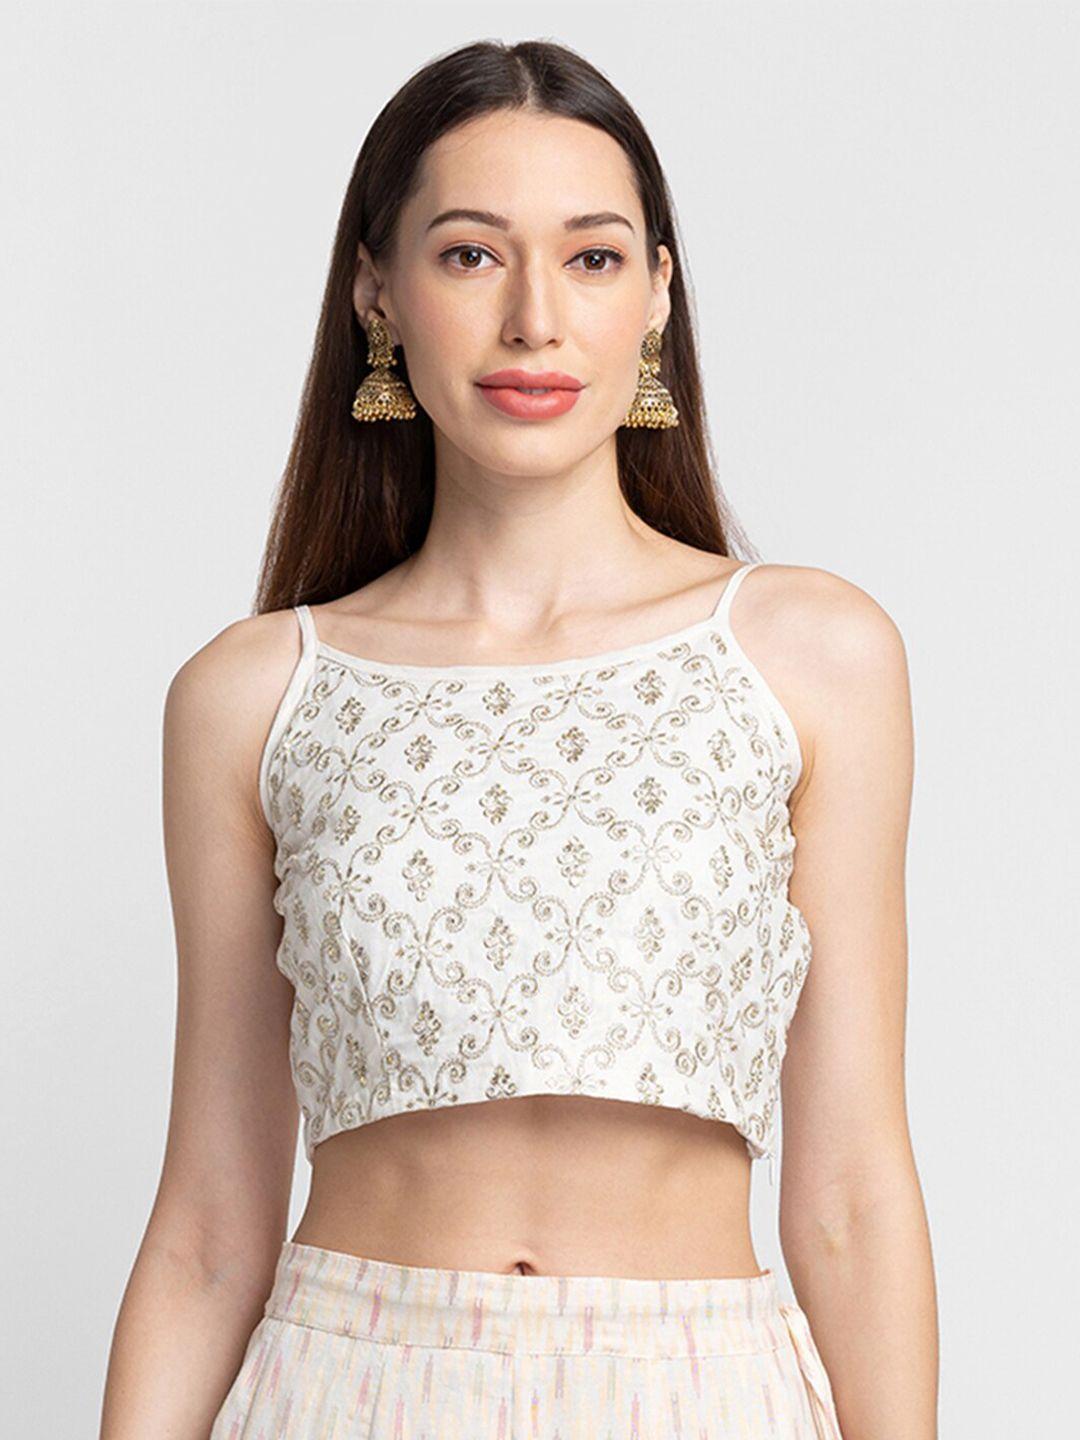 globus-woman-embroidered-crop-top